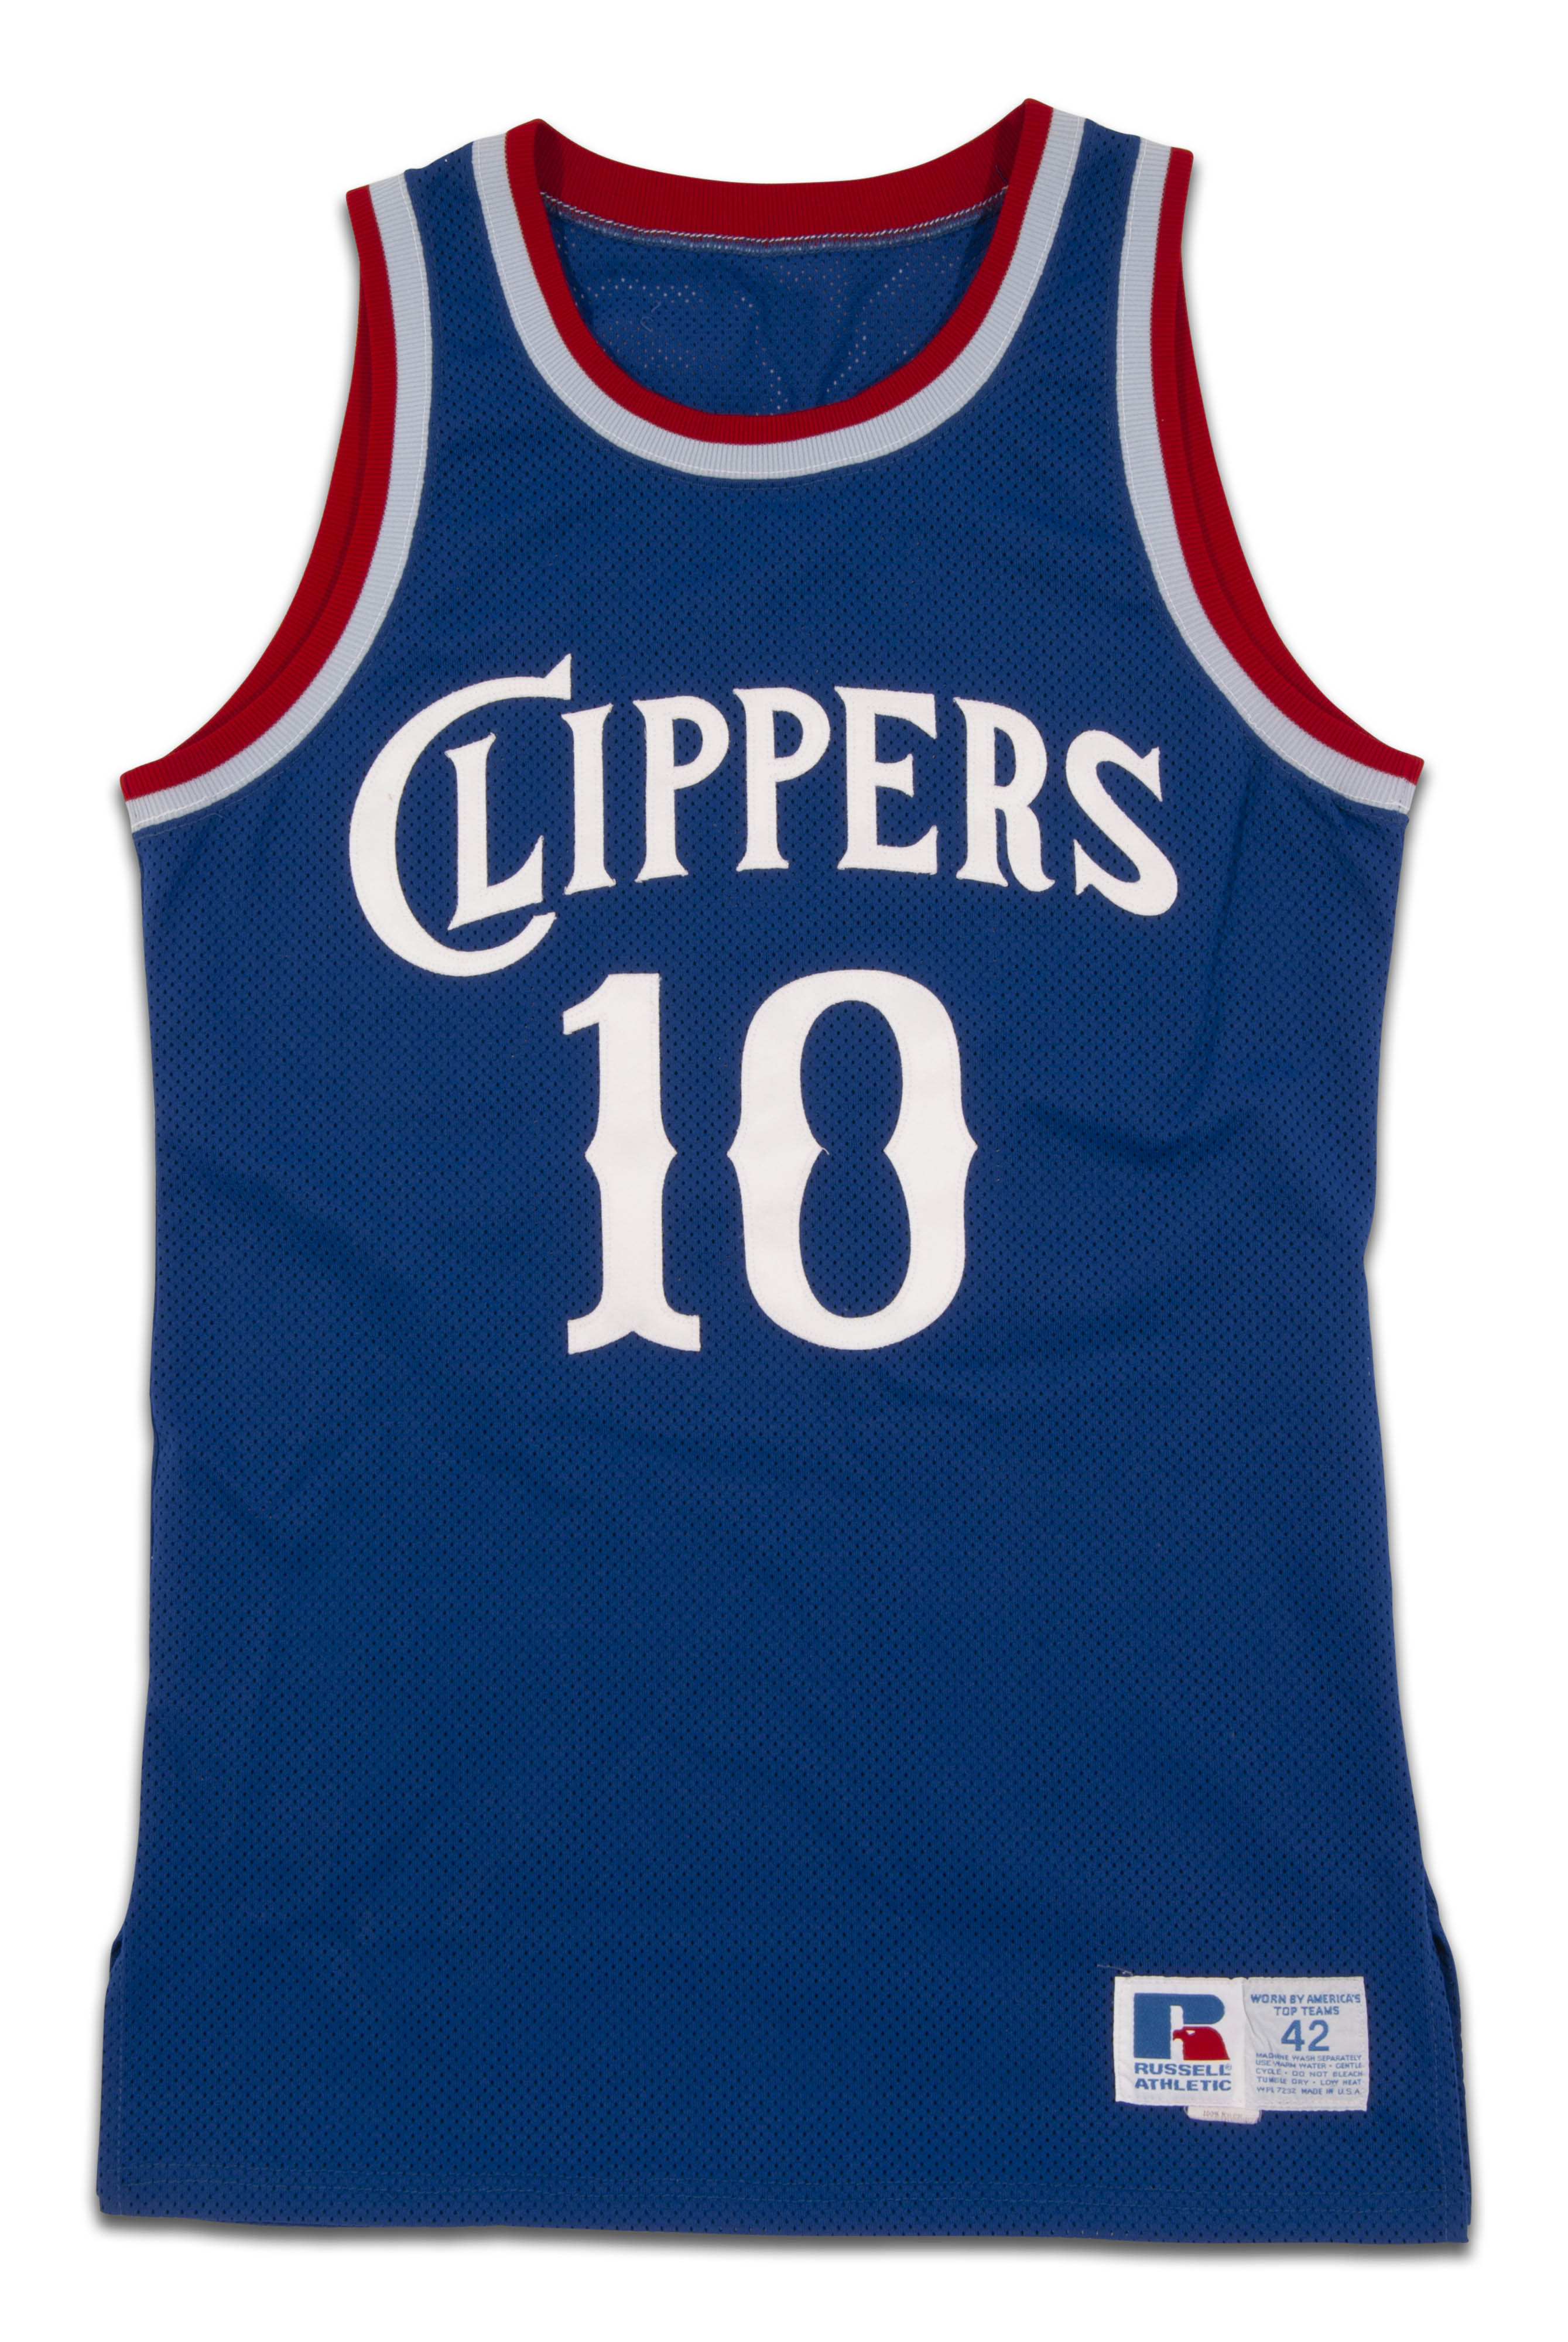 clippers jersey throwback